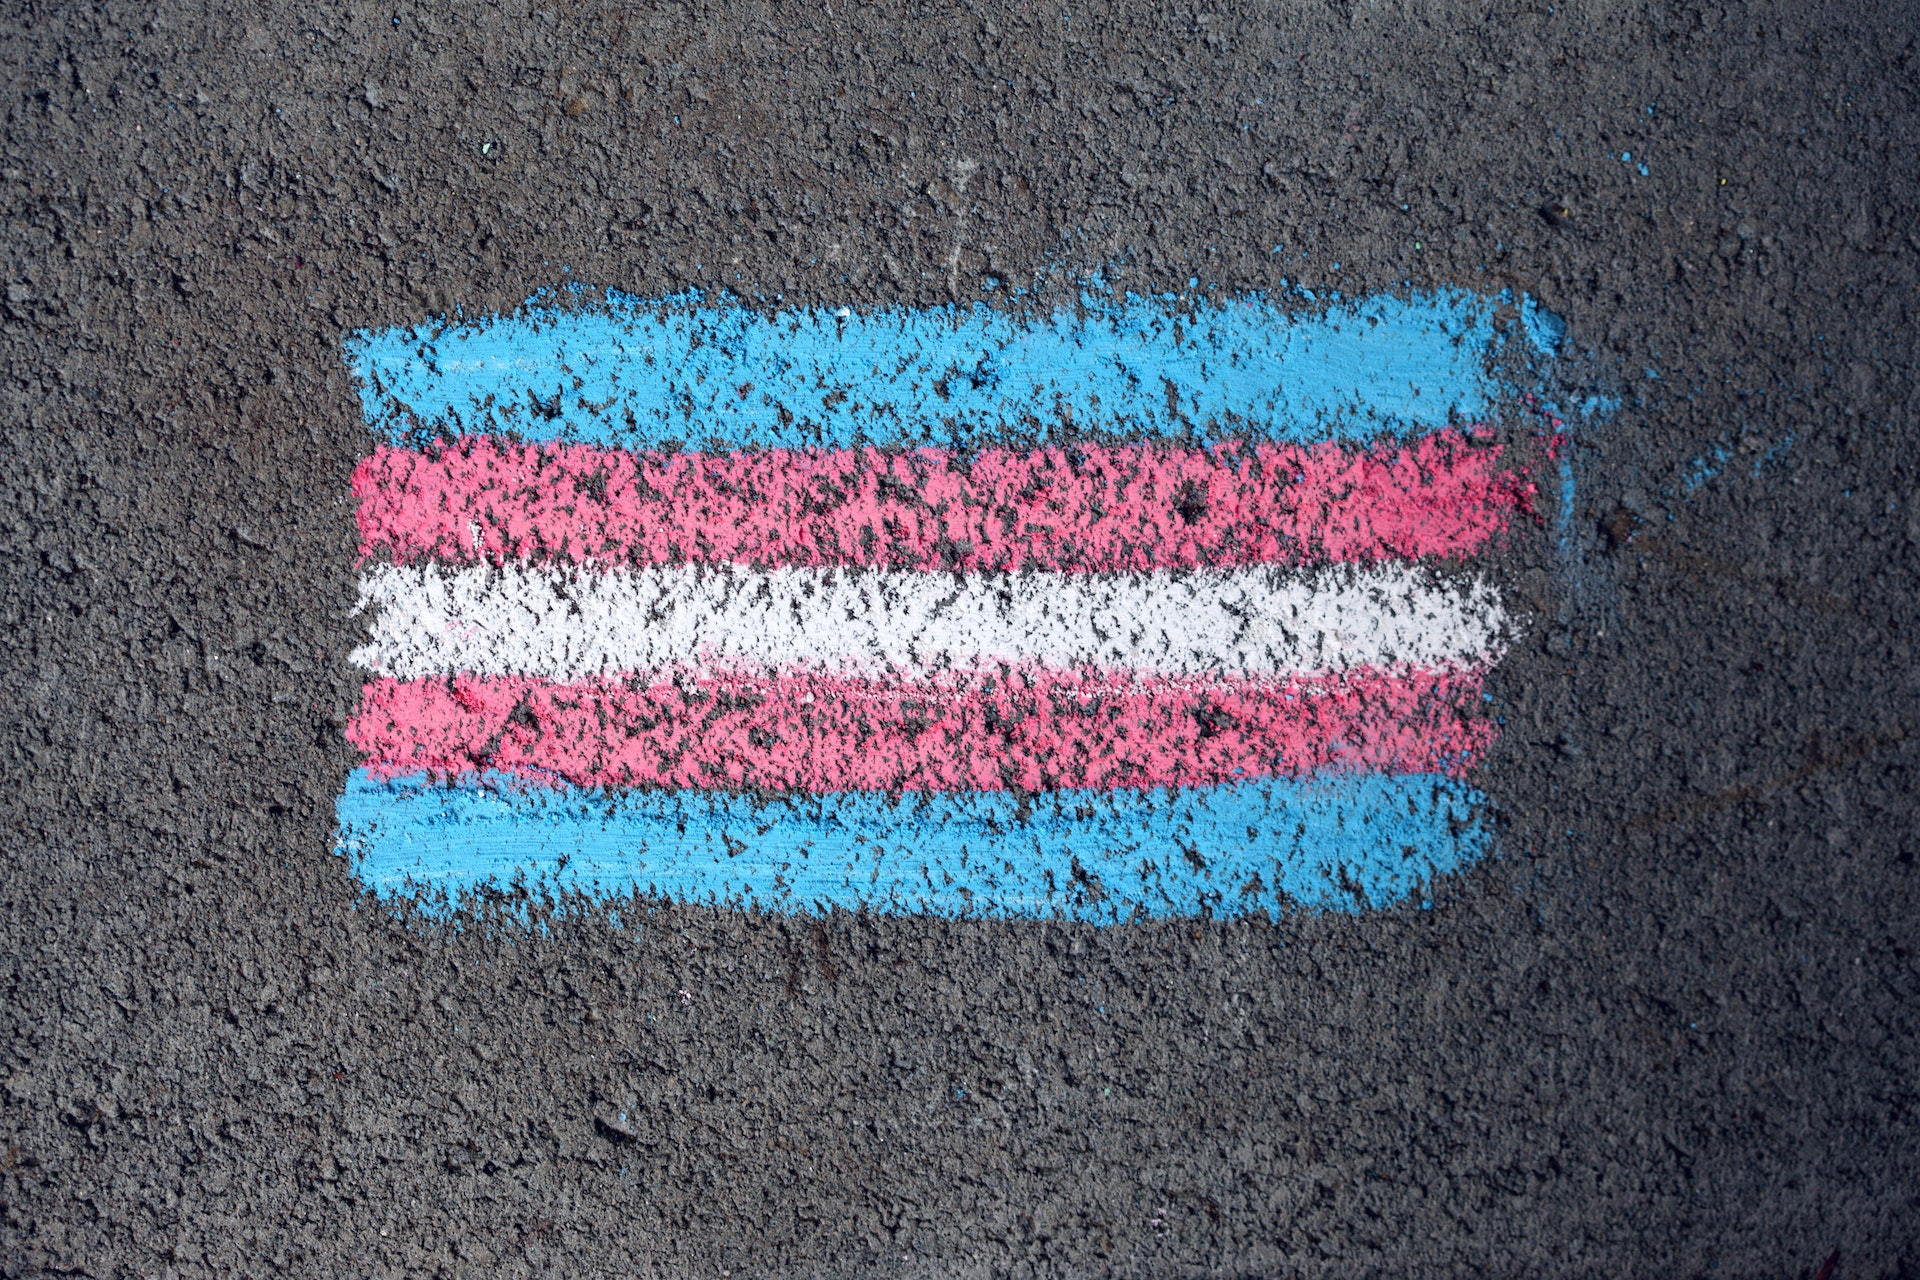 UK Conservative Party’s in transphobia shock